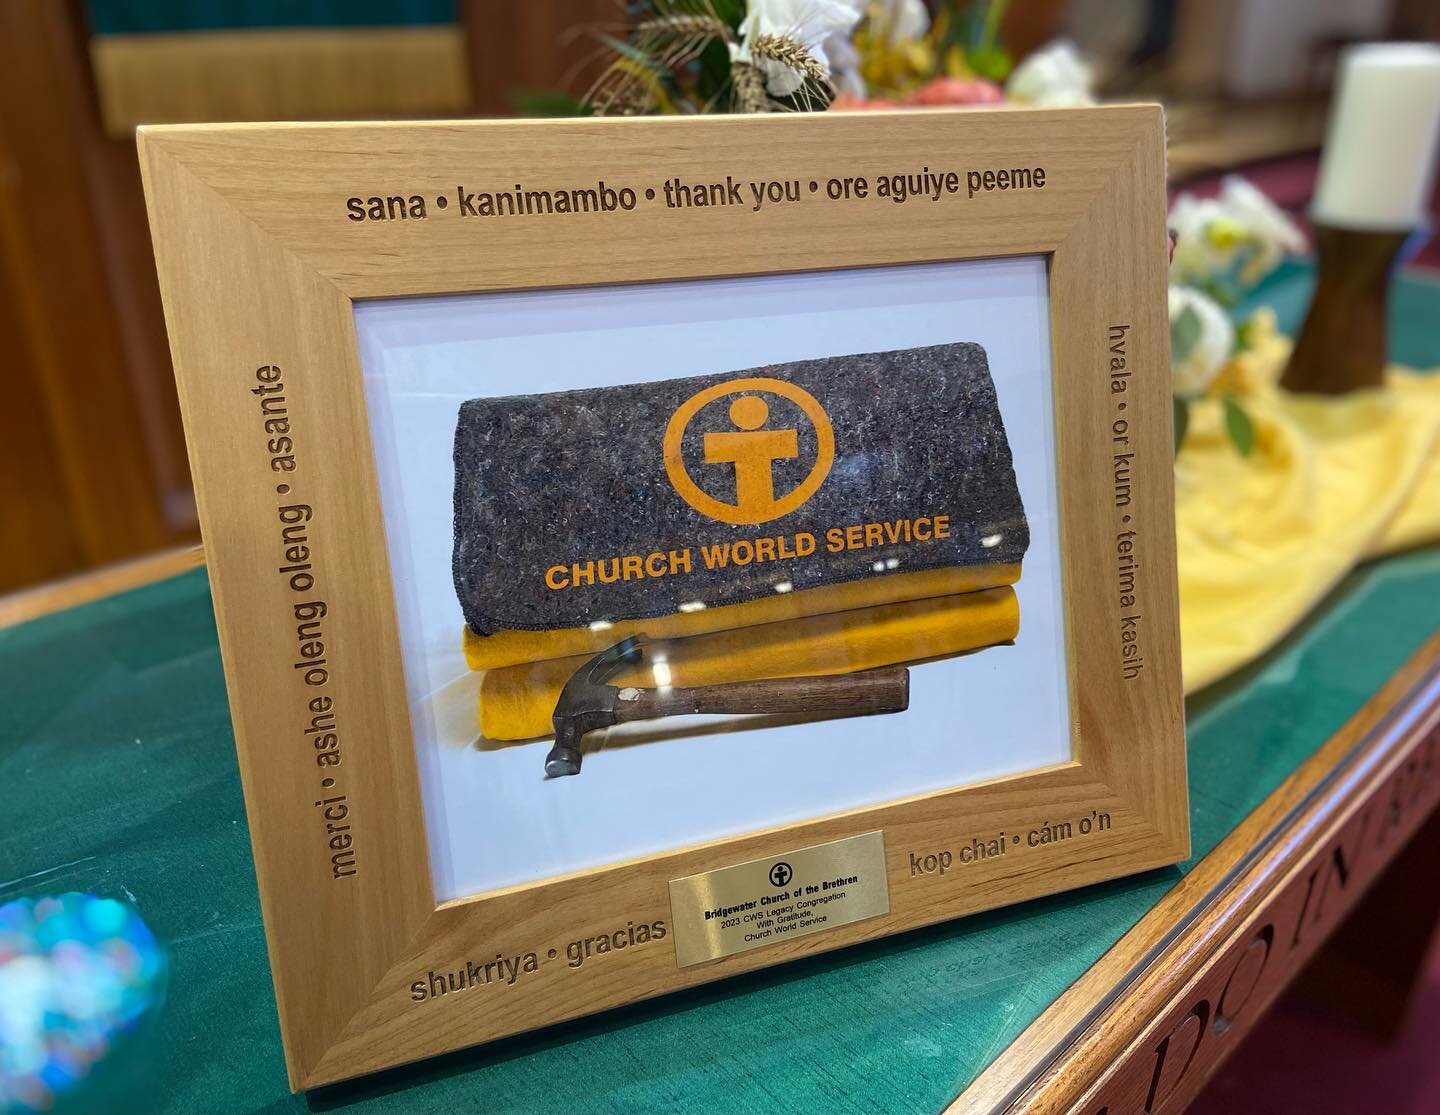 We accepted an award of gratitude from Church World Service today for our congregation&rsquo;s many years of service resettling refugees! Believe us, CWS, the honor is ours.